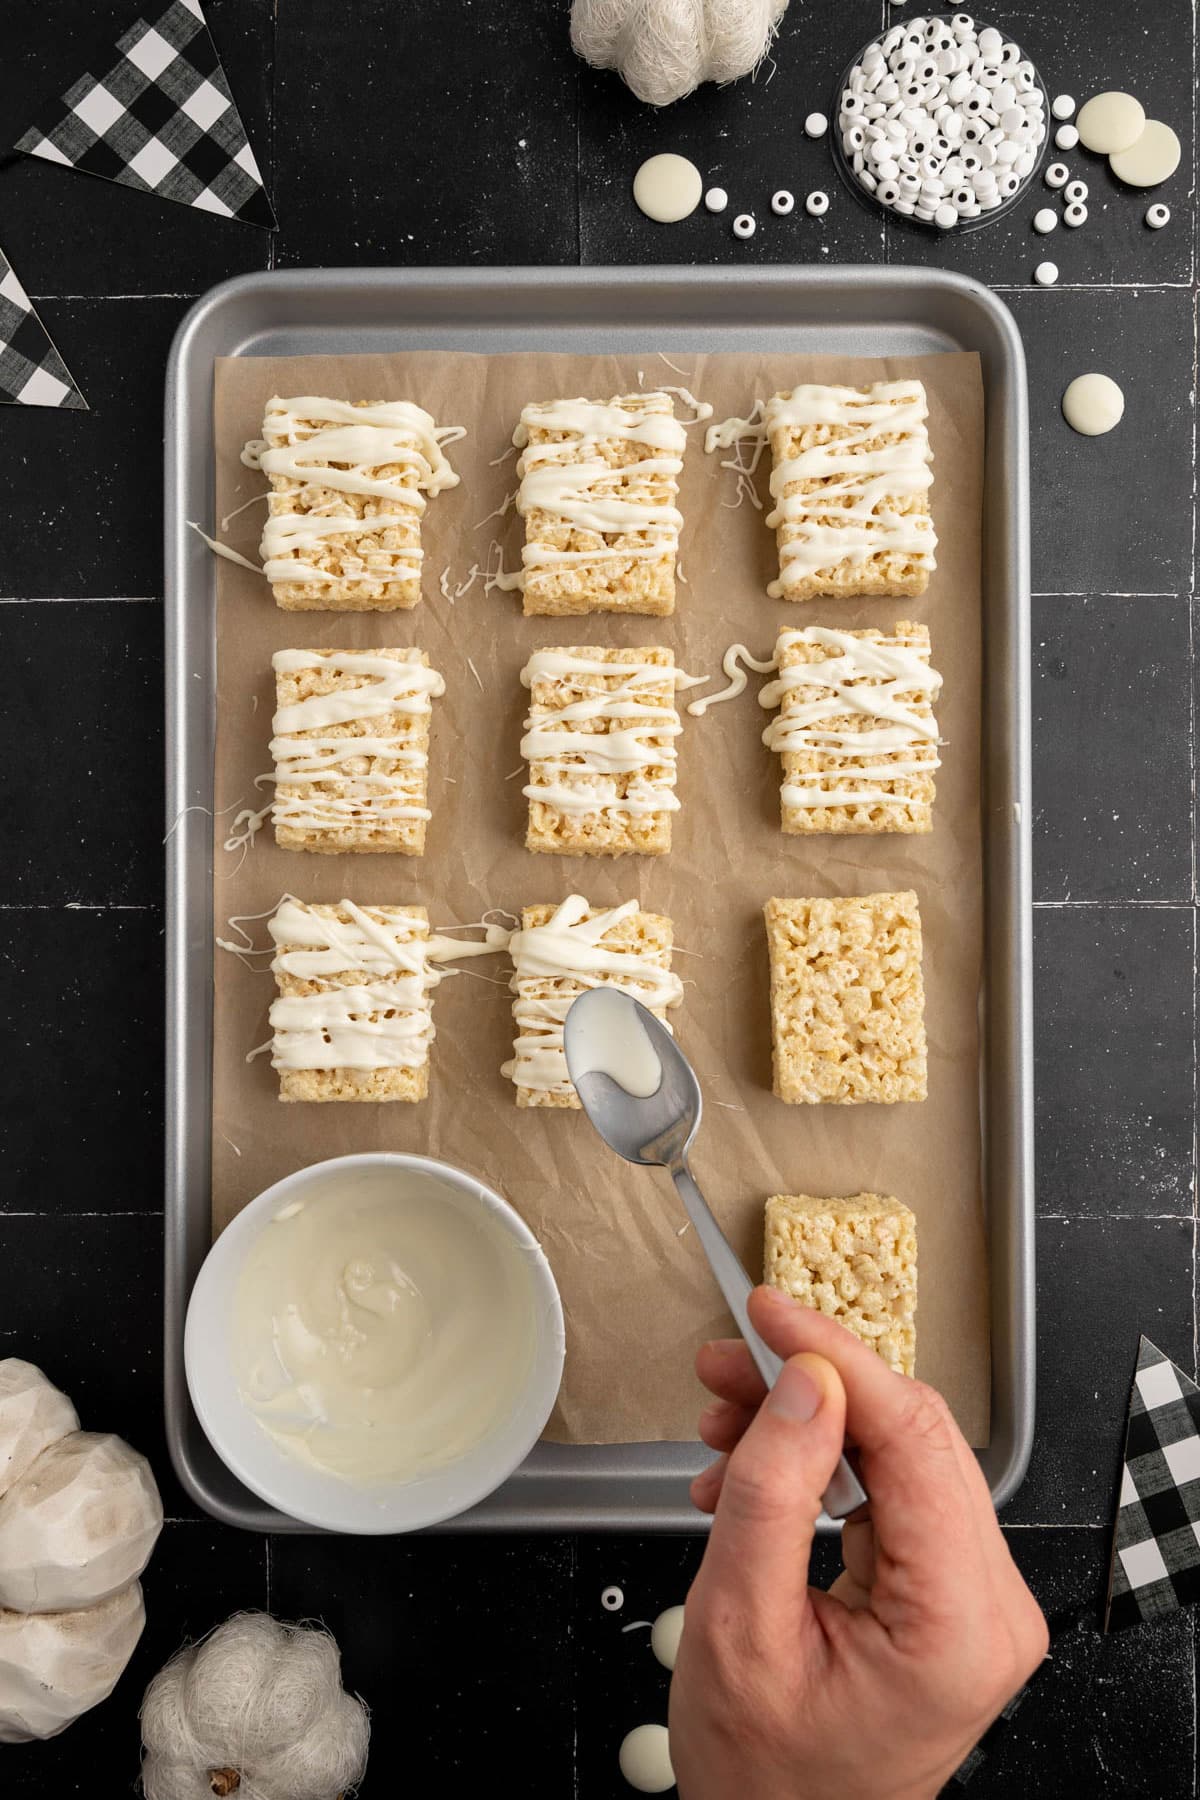 Process of preparing Mummy Rice Krispies Treats is to add a white dripping chocolate